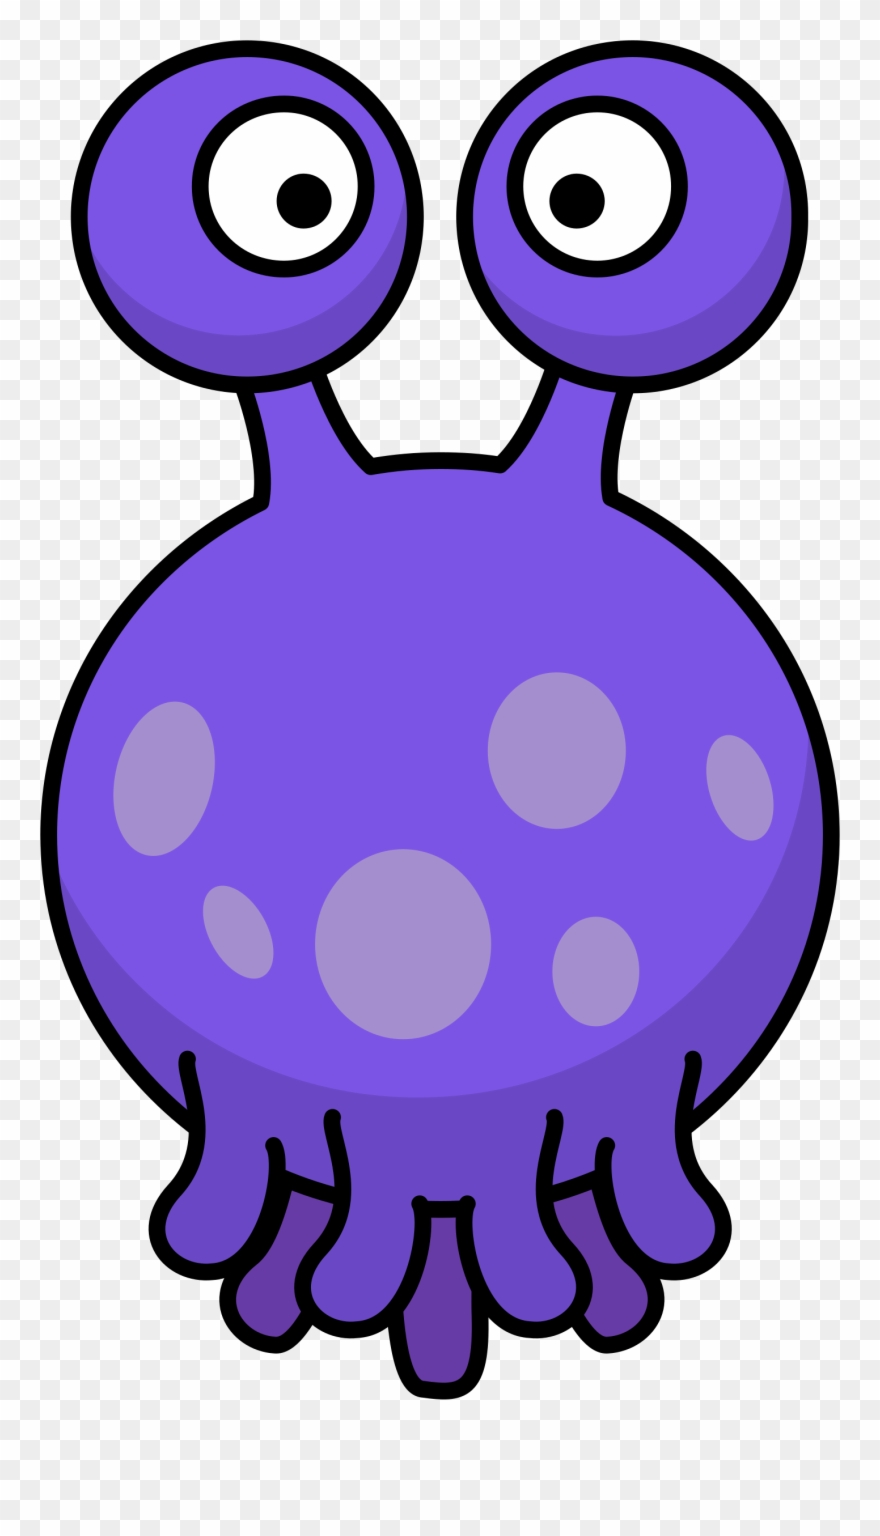 Clipart Floating Silly Alien With Tentacles.